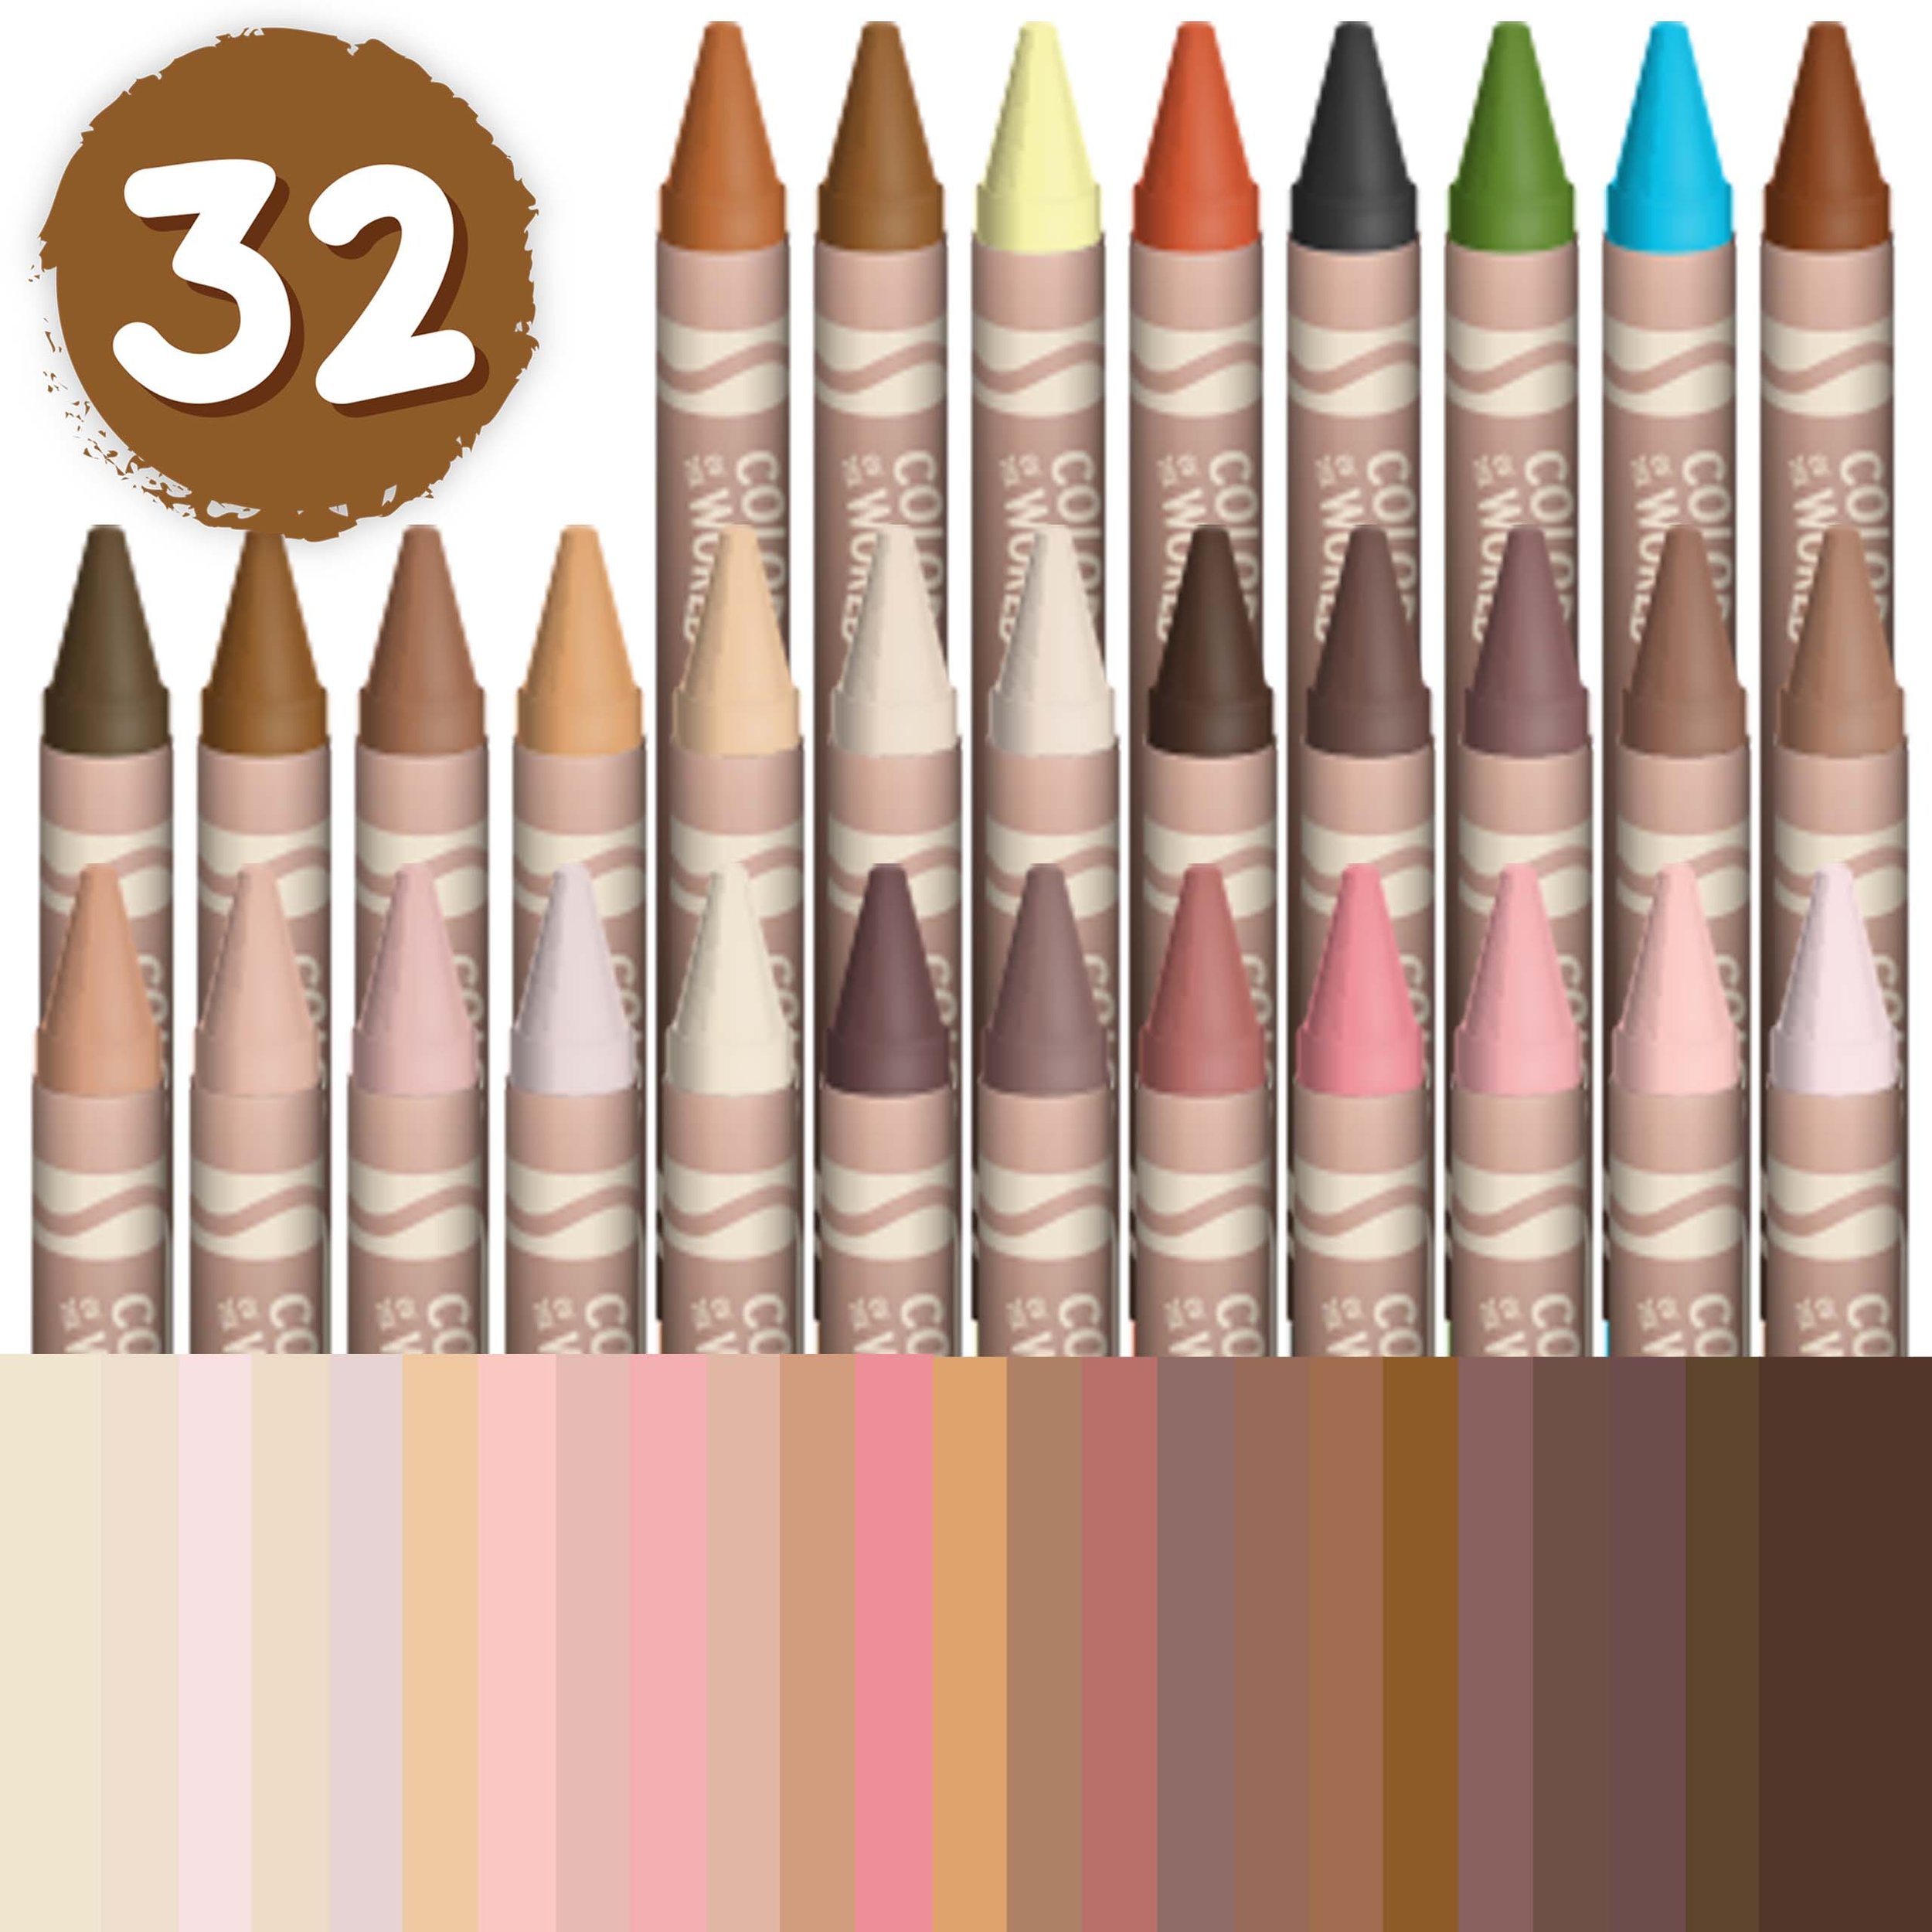 52-0110 - Colors of the World Crayons 32CT_02.jpg